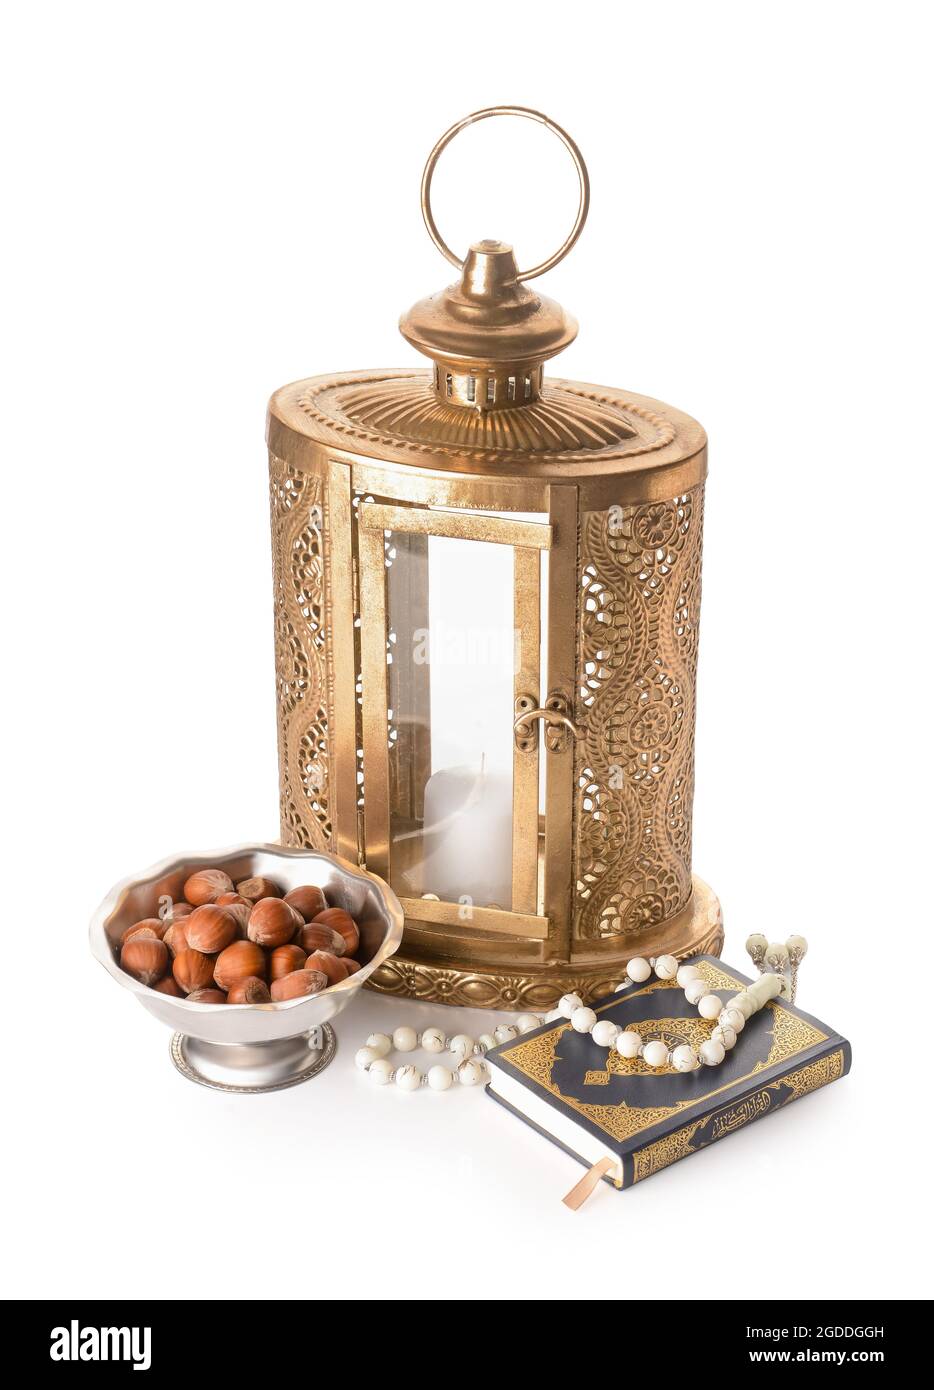 Muslim lantern with Quran, tasbih and nuts on white background Stock Photo